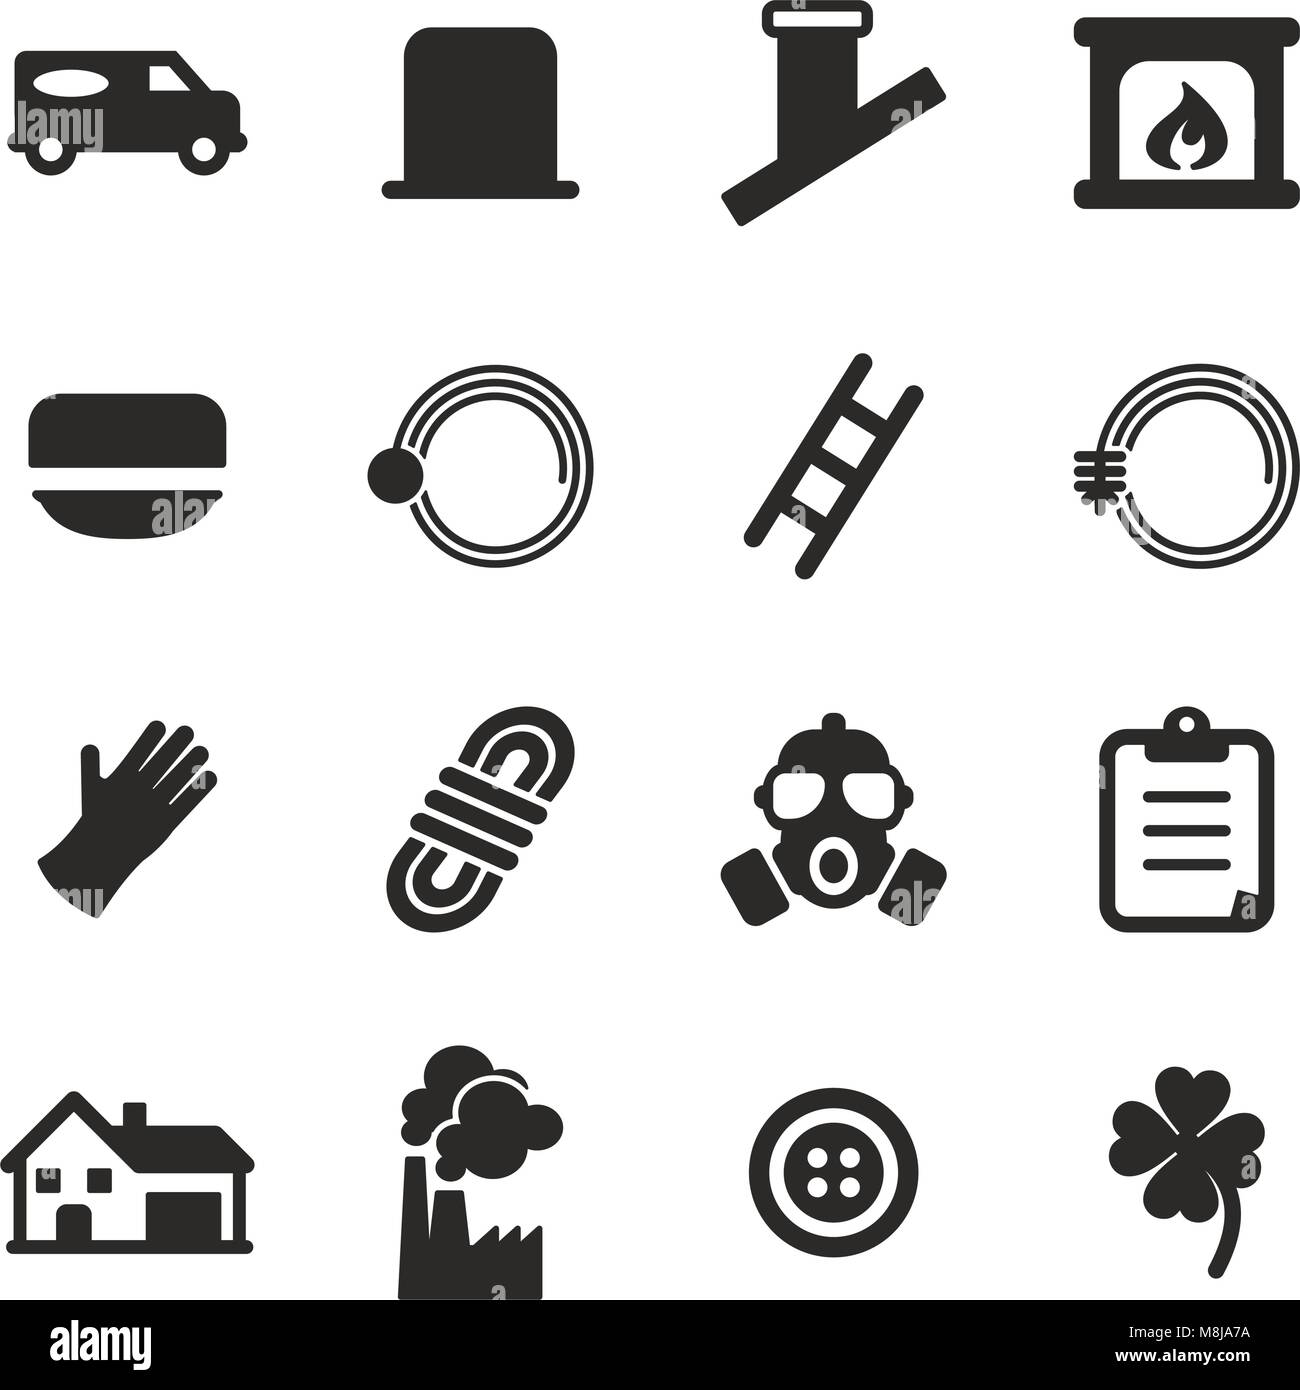 Chimney Sweeper Icons Stock Vector